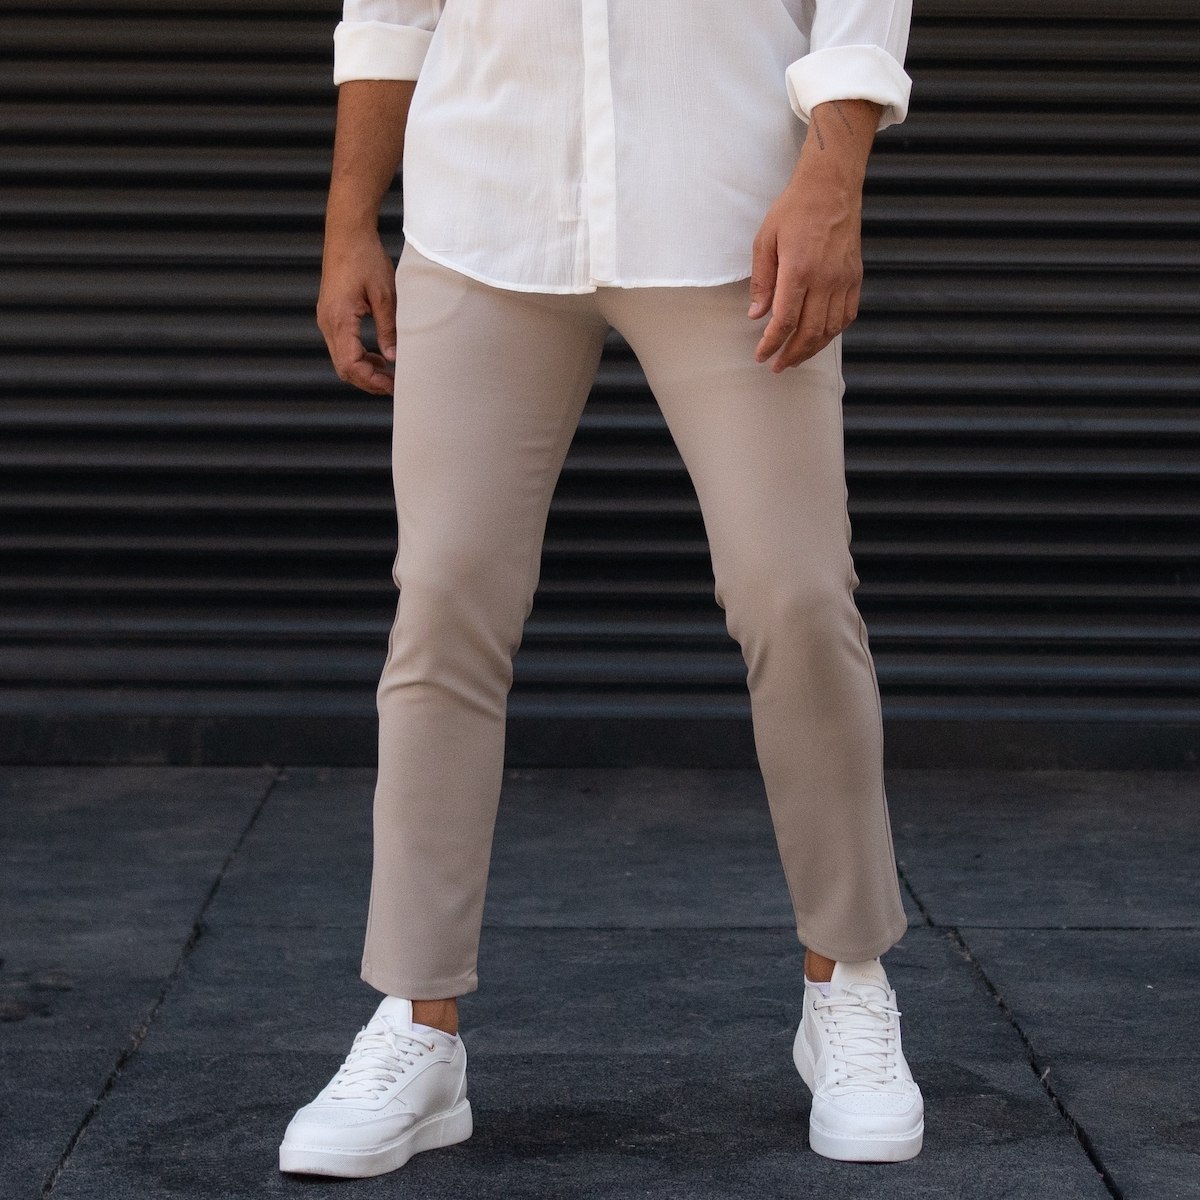 Mens Legs In Leather Fashion White Sneakers In Stylish Beige Pants Trendy  Casual Outfit Details Of Everyday Look Street Fashion Closeup Stock  Photo Picture and Royalty Free Image Image 121911524